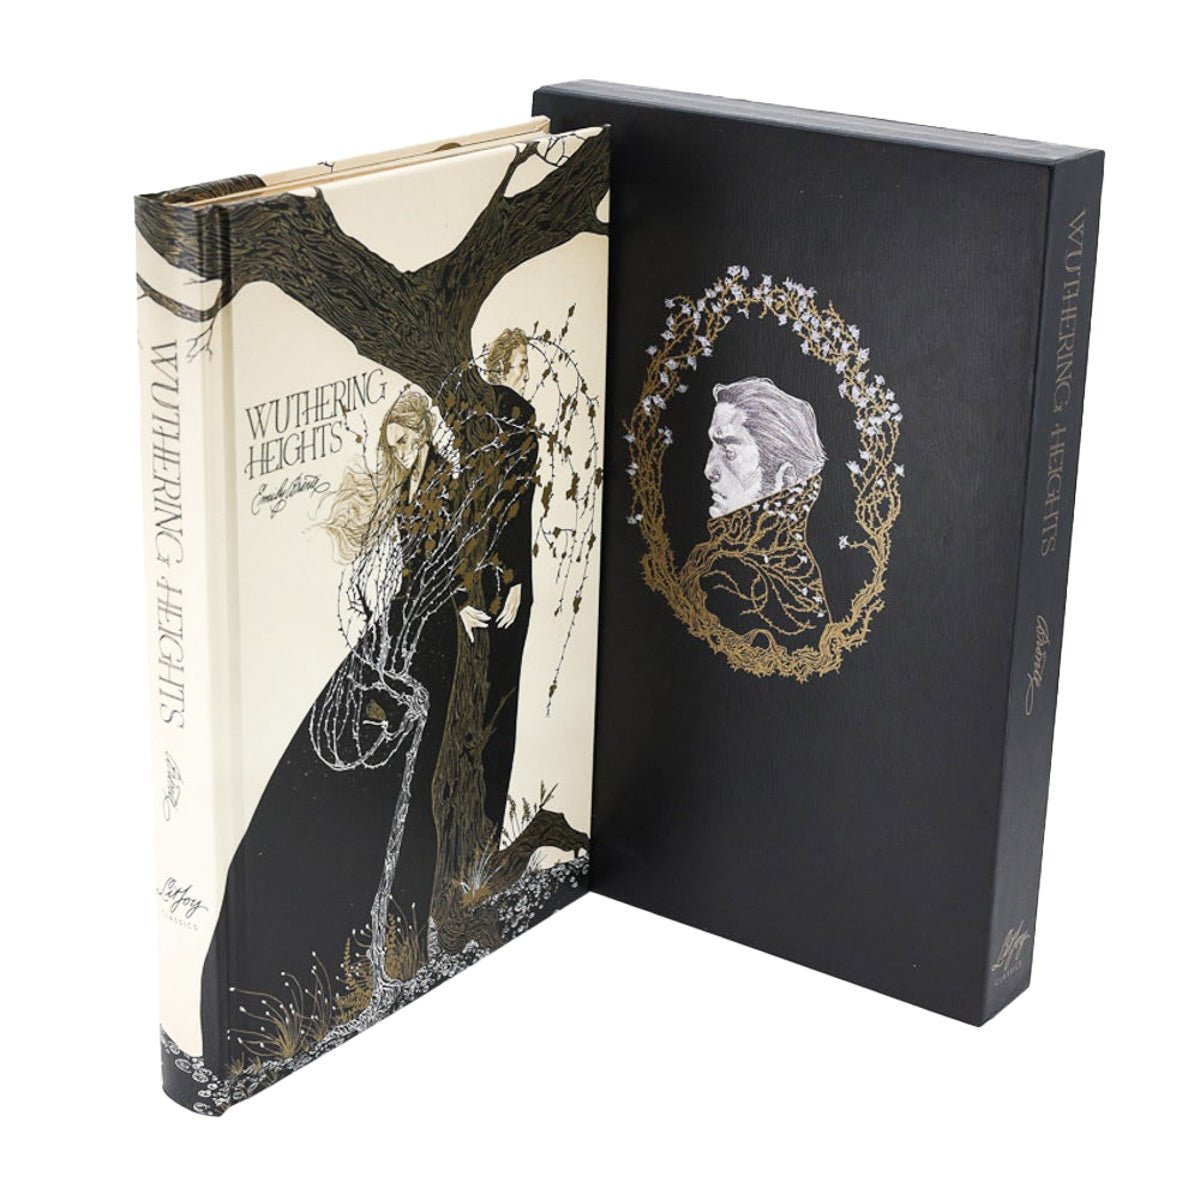 Wuthering Heights is off-white with a tree and Catherine and Heathcliff back to back and the slipcase is black with a profile of Heathcliff